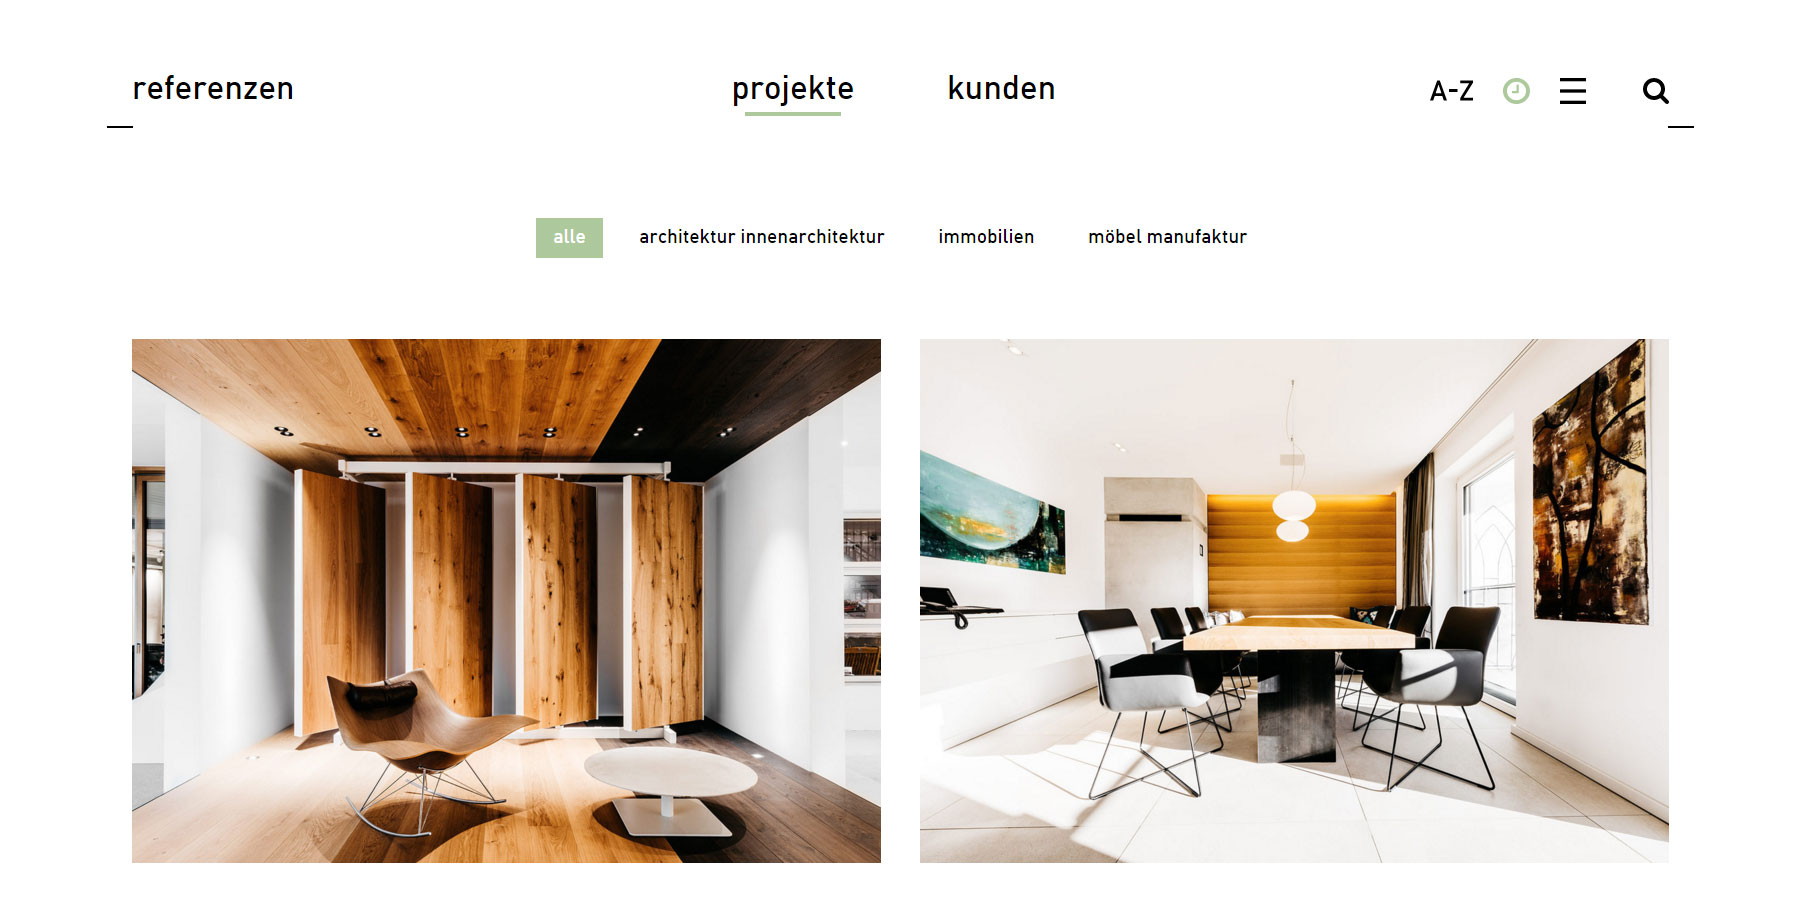 bruederl - architecture & furniture - Website of the Day